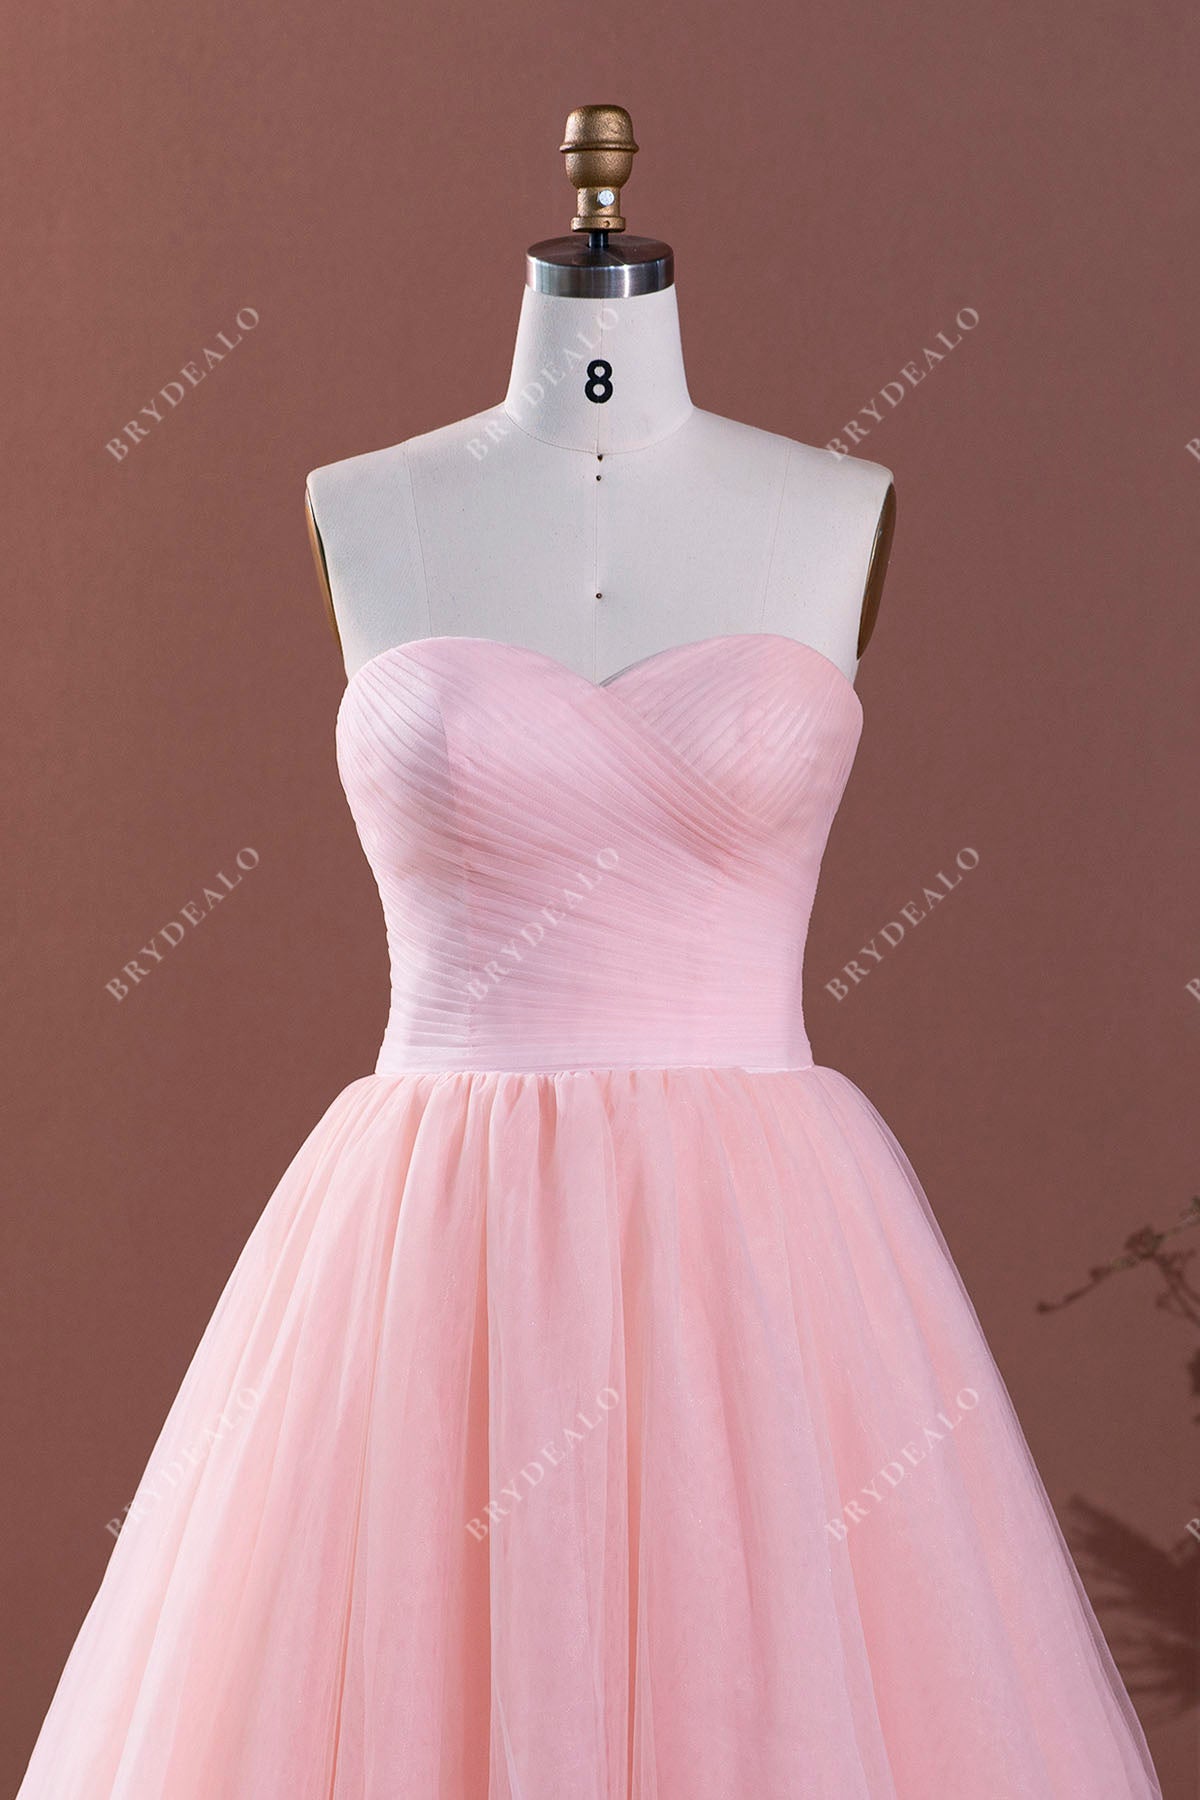 pink sweetheart tulle strapless wedding dress